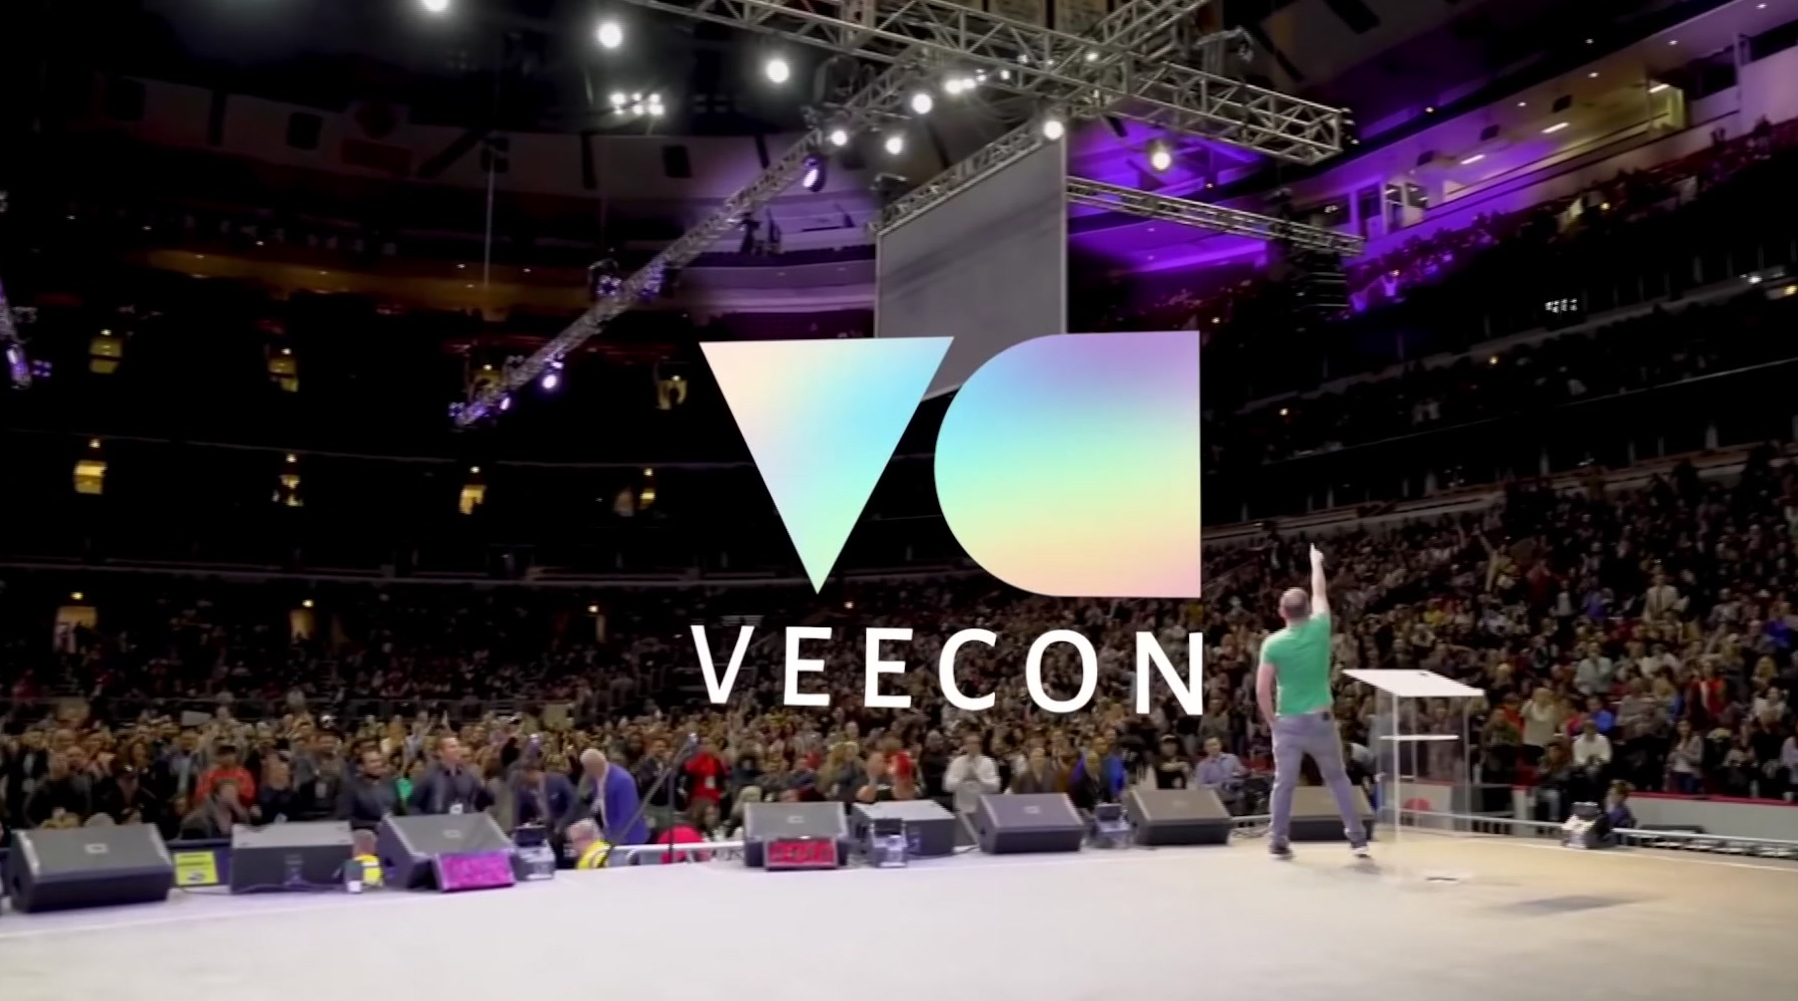 VeeCon To Brings Thousands, Including Some Big Celebs, To Downtown Minneapolis